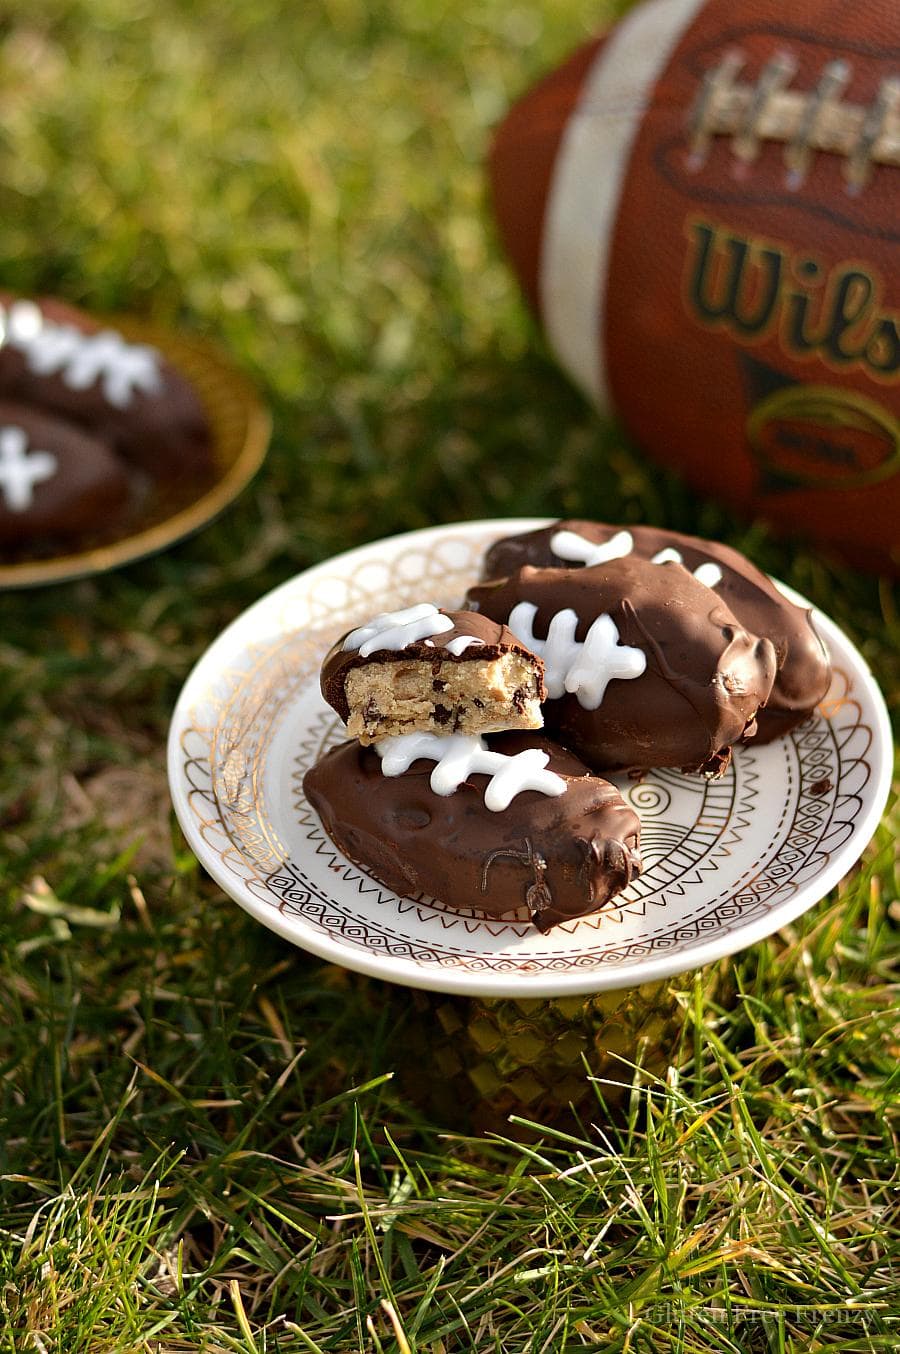 These gluten-free cookie dough footballs are perfect for your next sports night or Superbowl party. Gluten-Free Super Bowl Food | gluten-free appetizers and treats | gluten-free party food | gluten-free tailgate recipes | Super Bowl recipes | super bowl party ideas || This Vivacious Life #superbowl #partyrecipes #glutenfreepartyfood